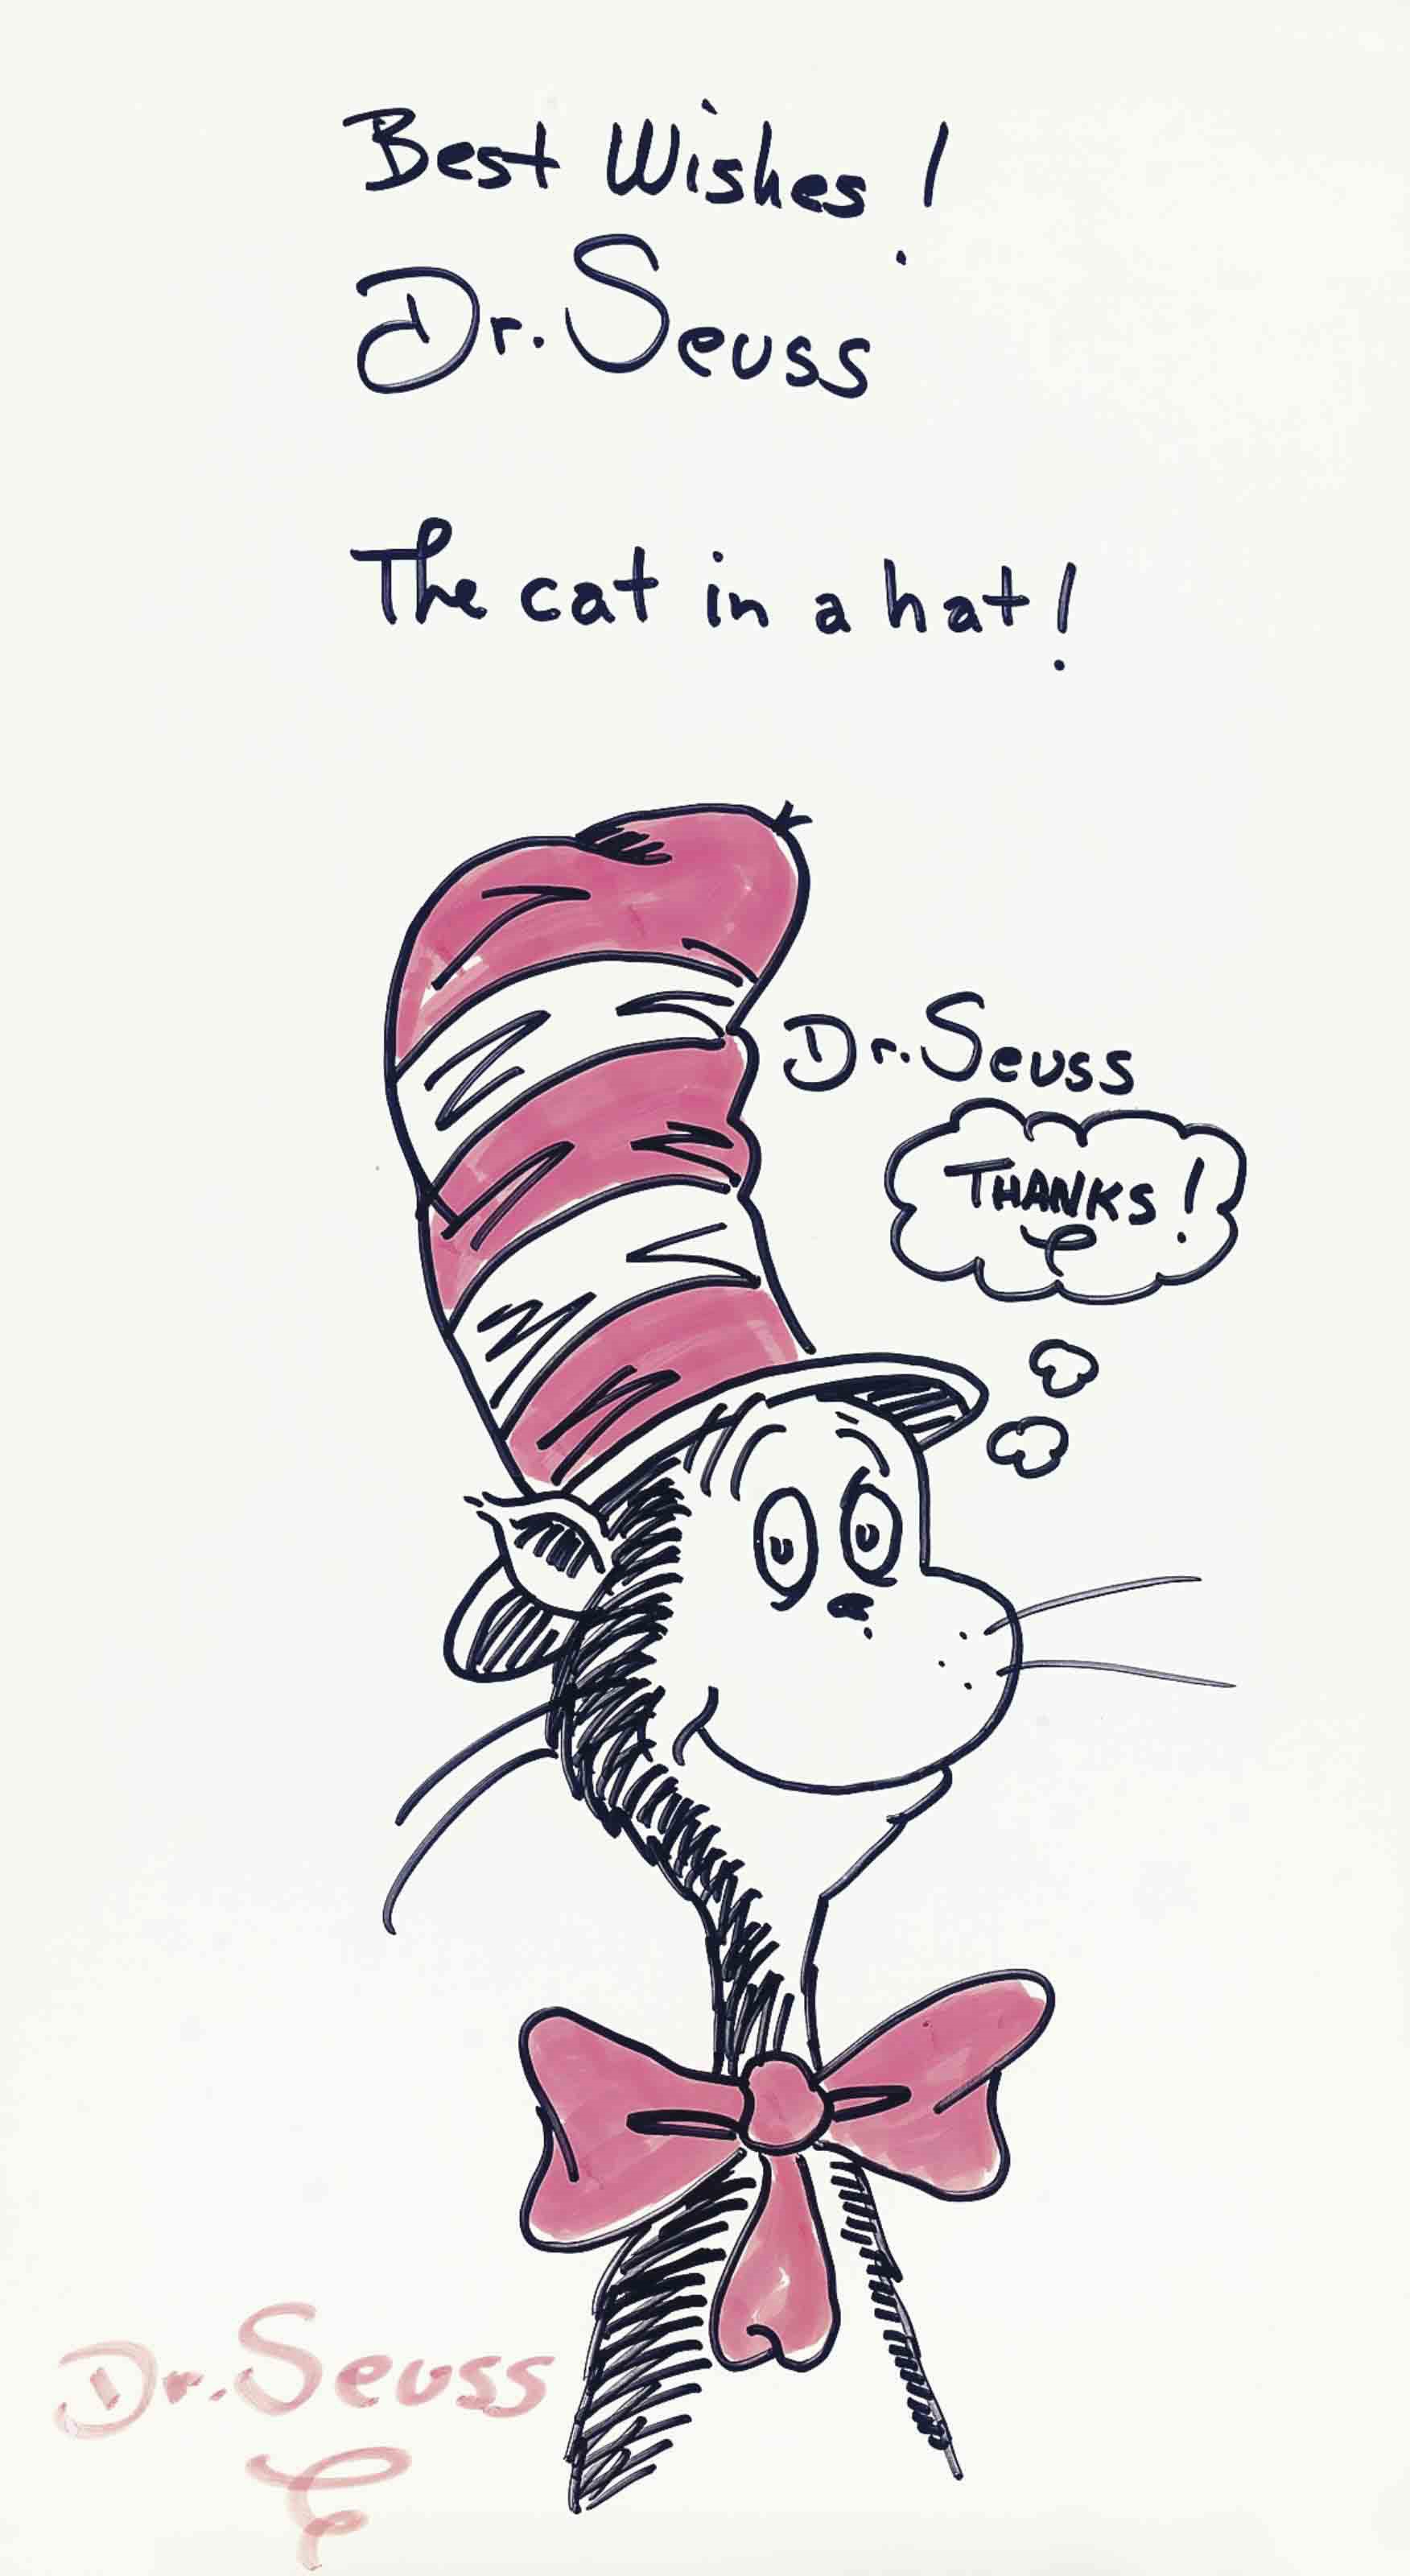 Dr. Seuss | The cat in a hat! | MutualArt